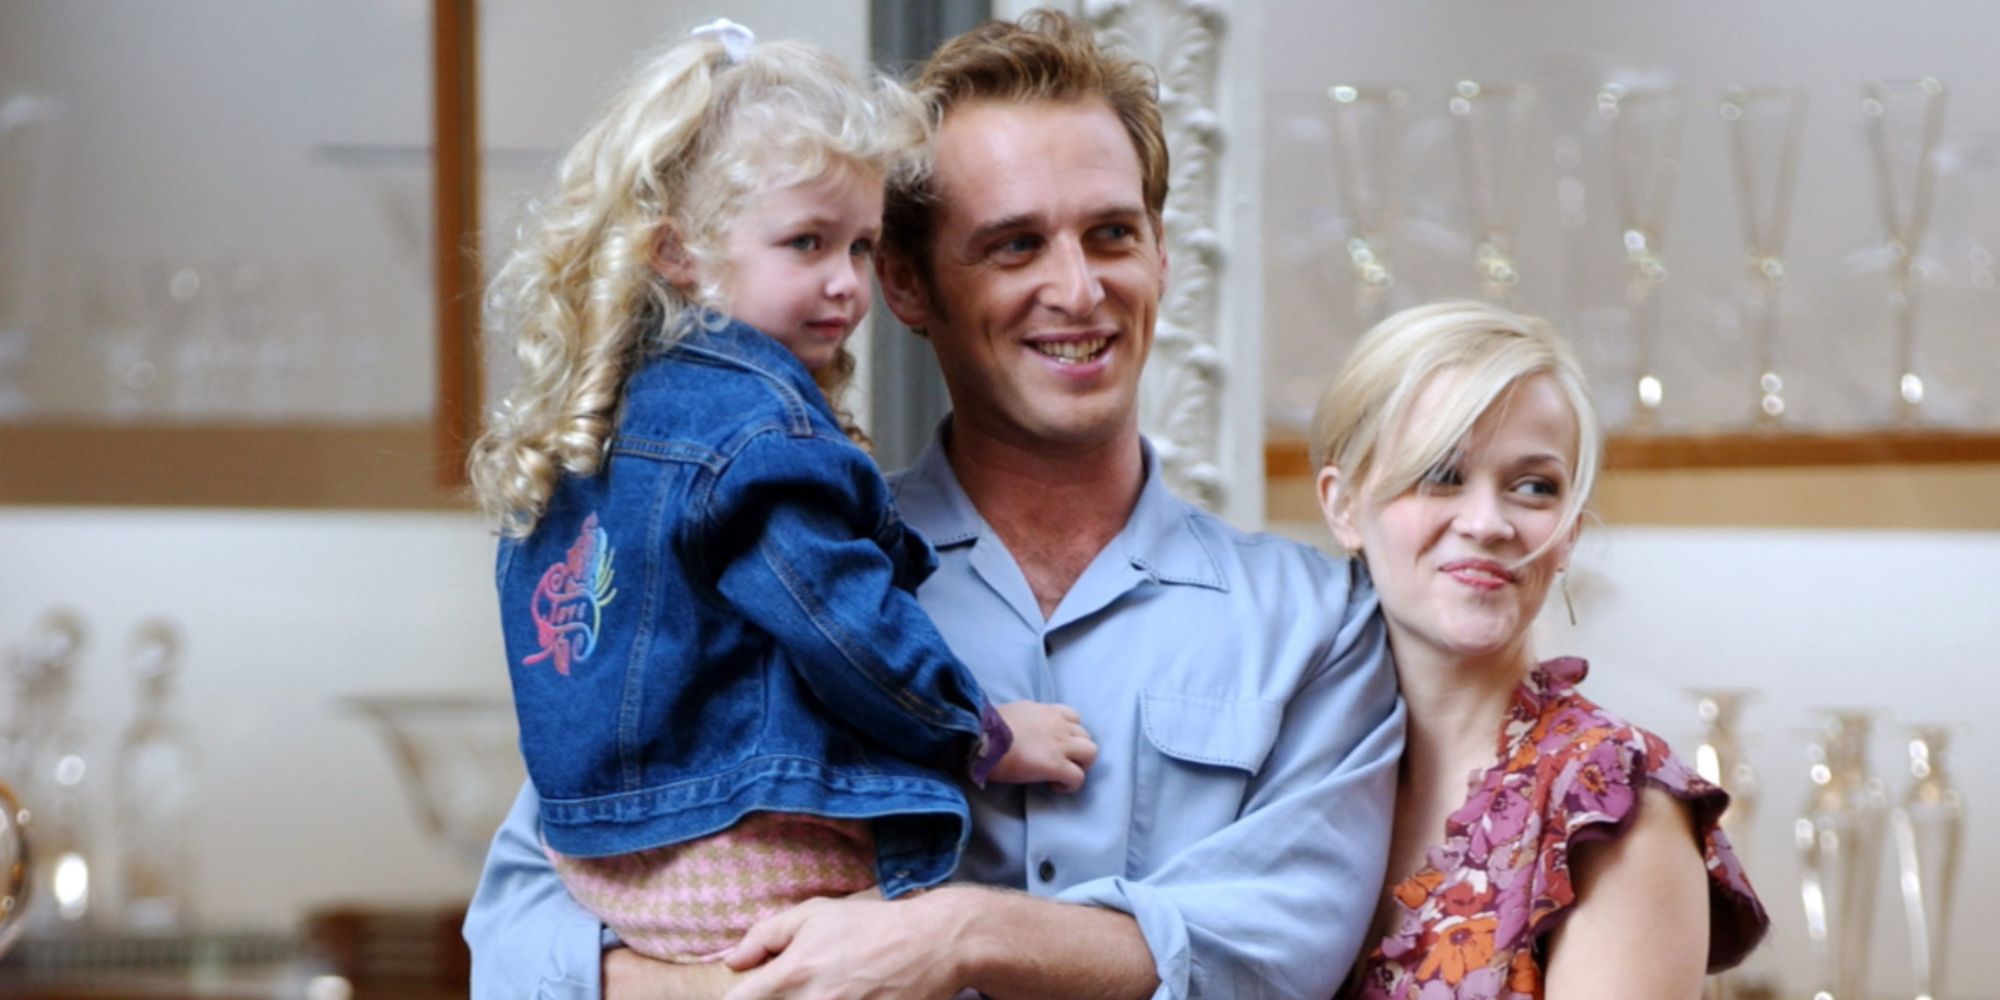 Josh Lucas and Reese Witherspoon with their daughter looking happy 